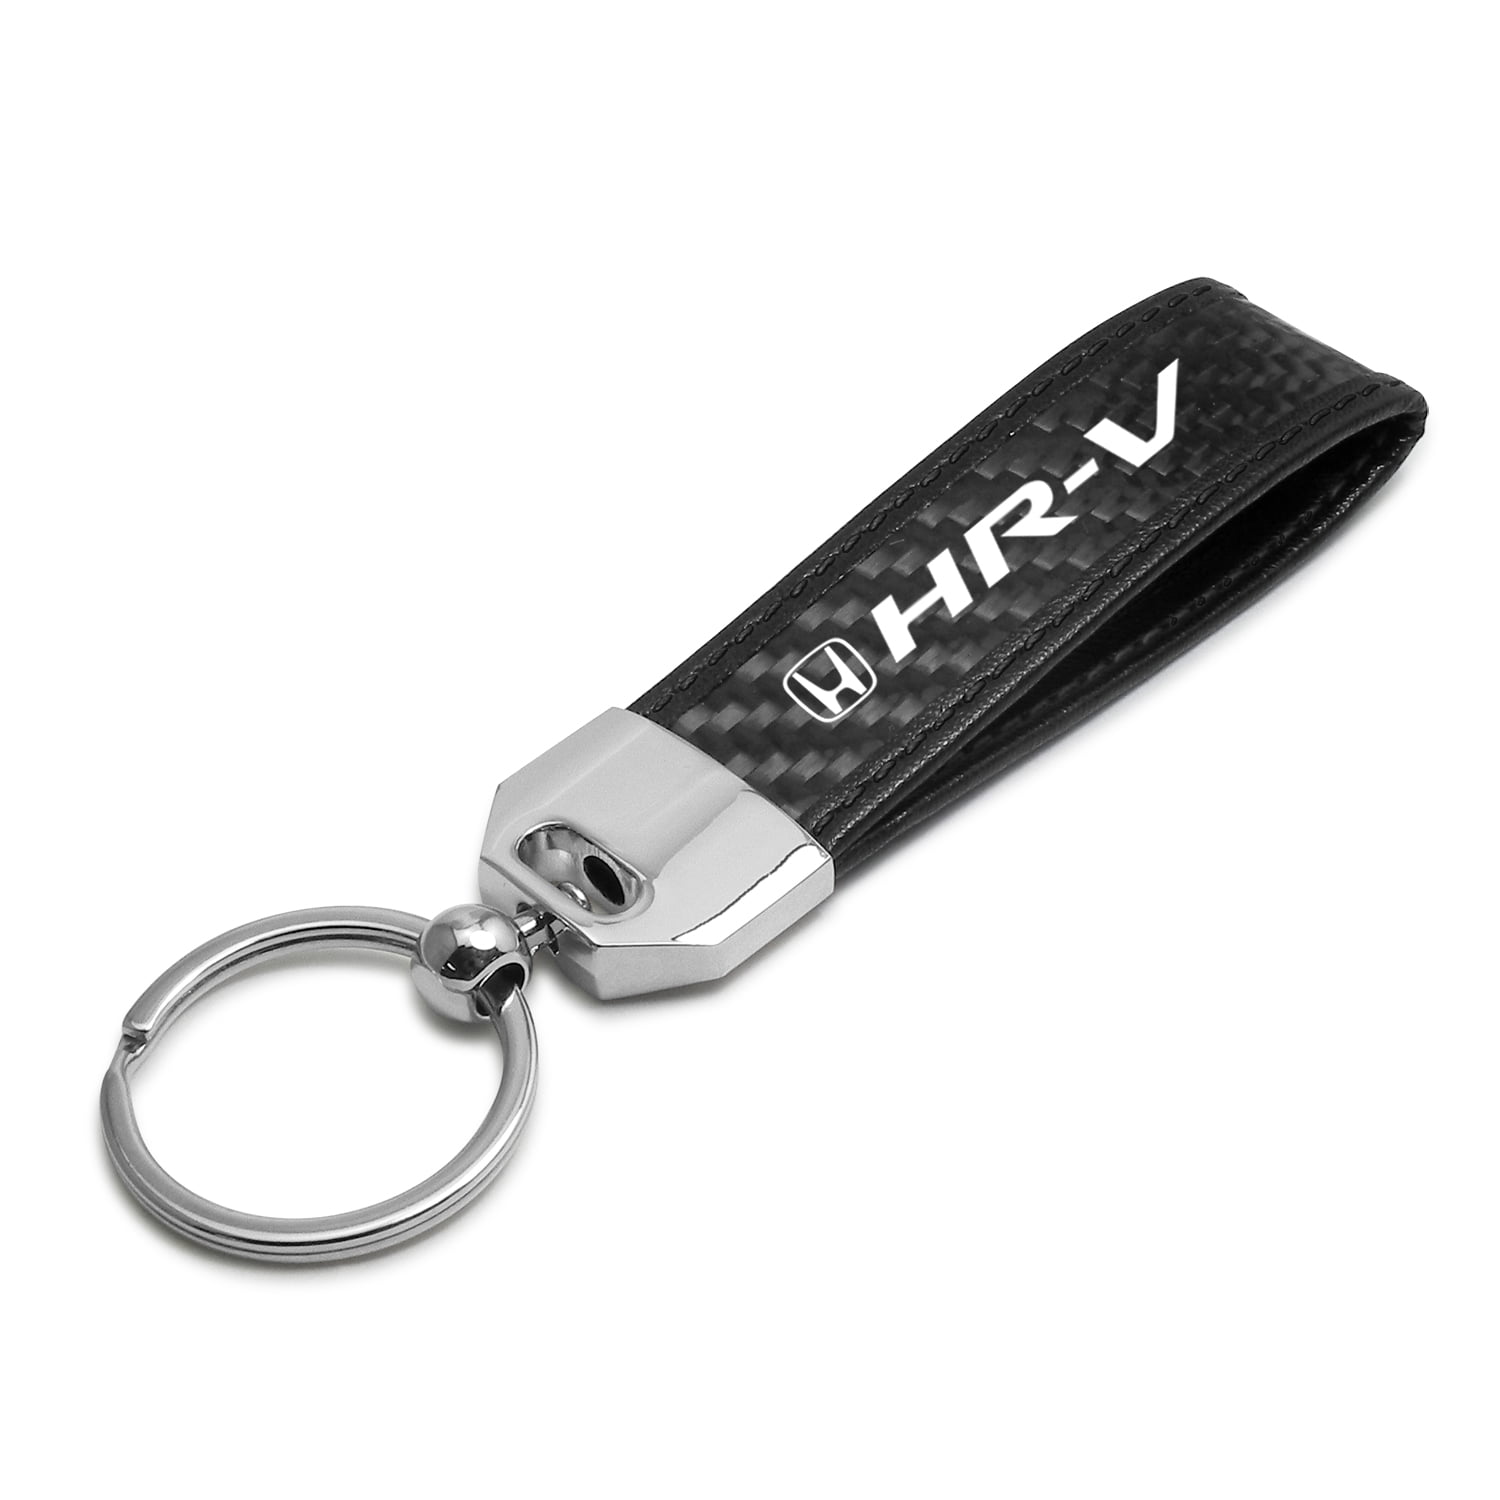 Lexus Brown Leather Key Chain Official Licensed 4350397446 